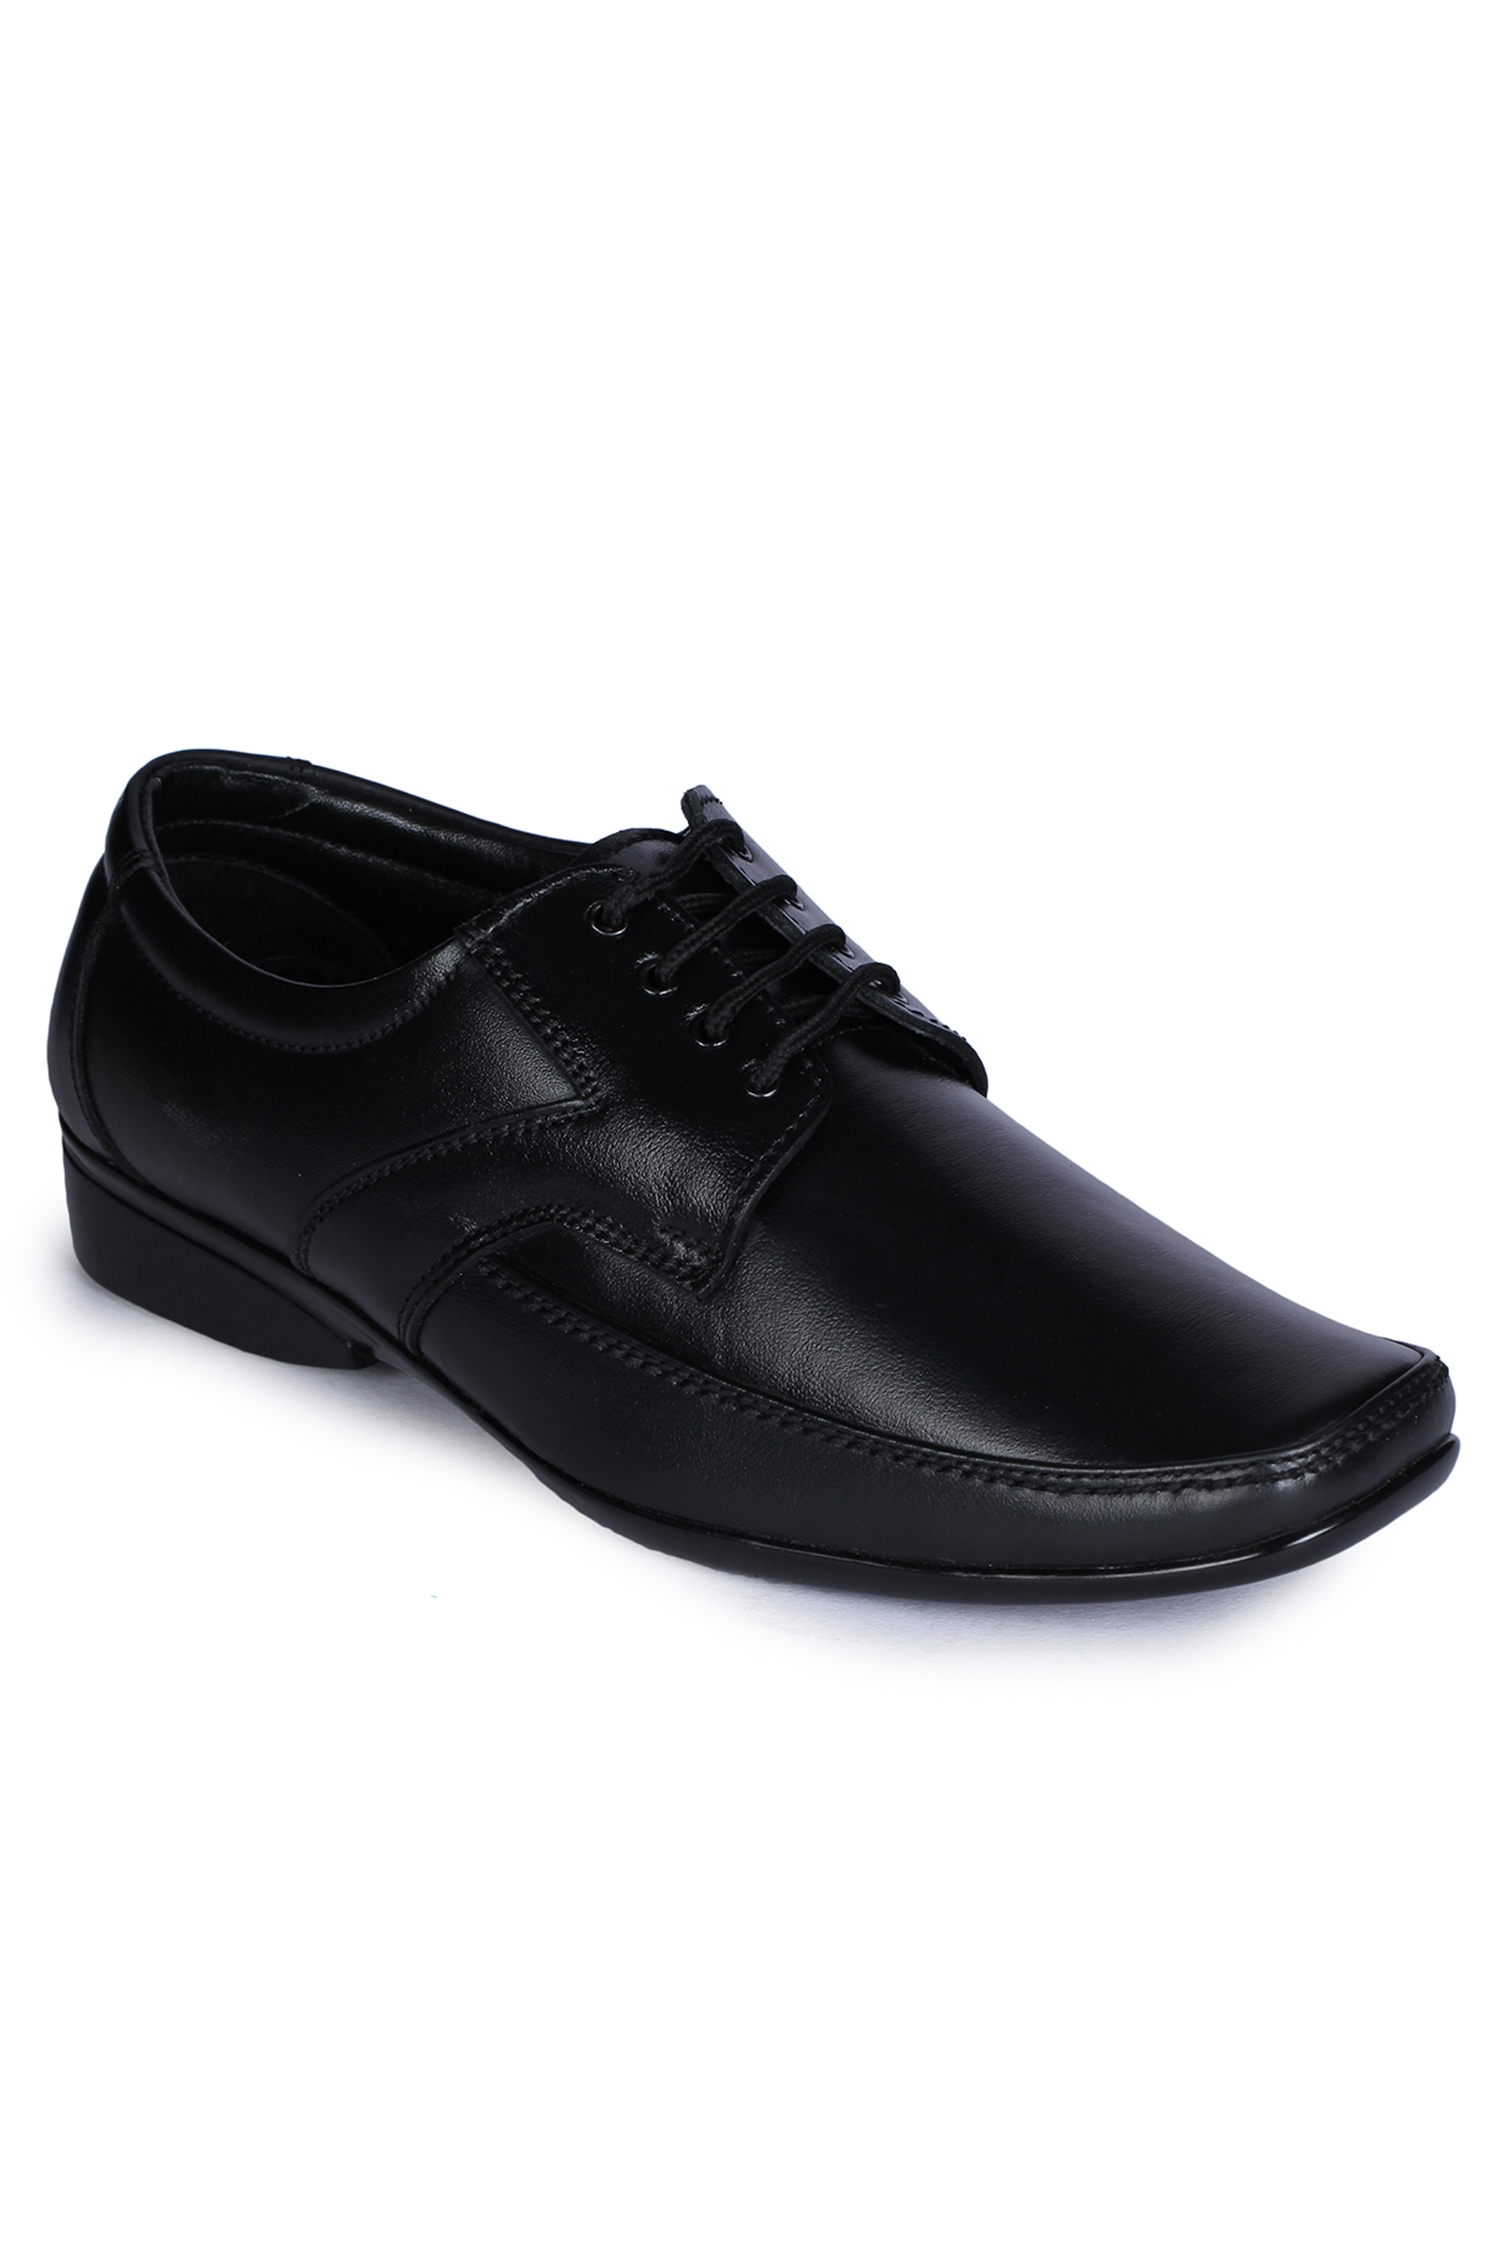 Liberty | Liberty Fortune Black Formal Derby Shoes A9H-03_Black For - Men